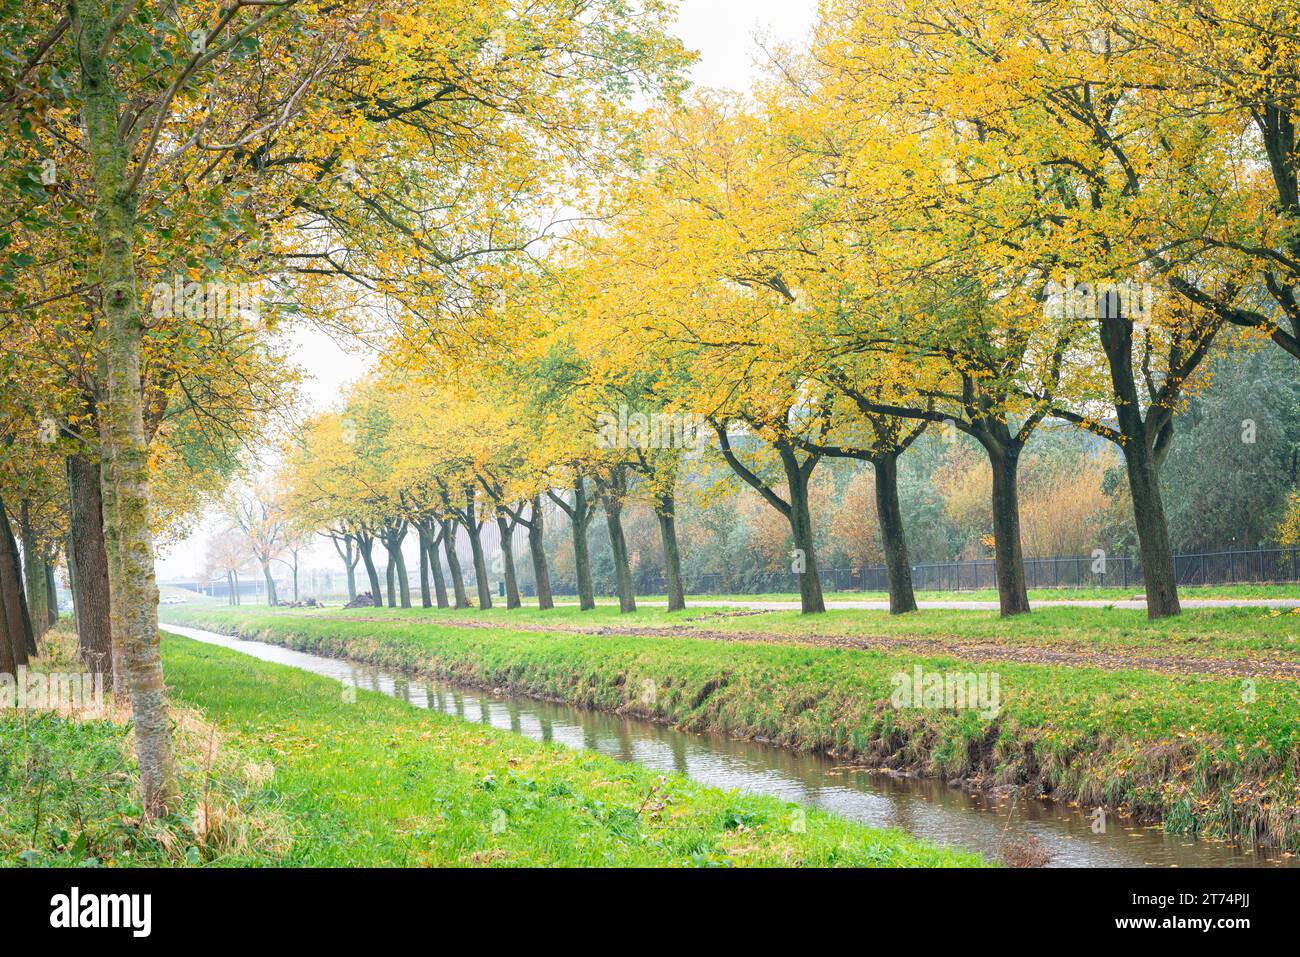 Beautiful perspective scenery with a row of trees in autumn colors. Stock Photo